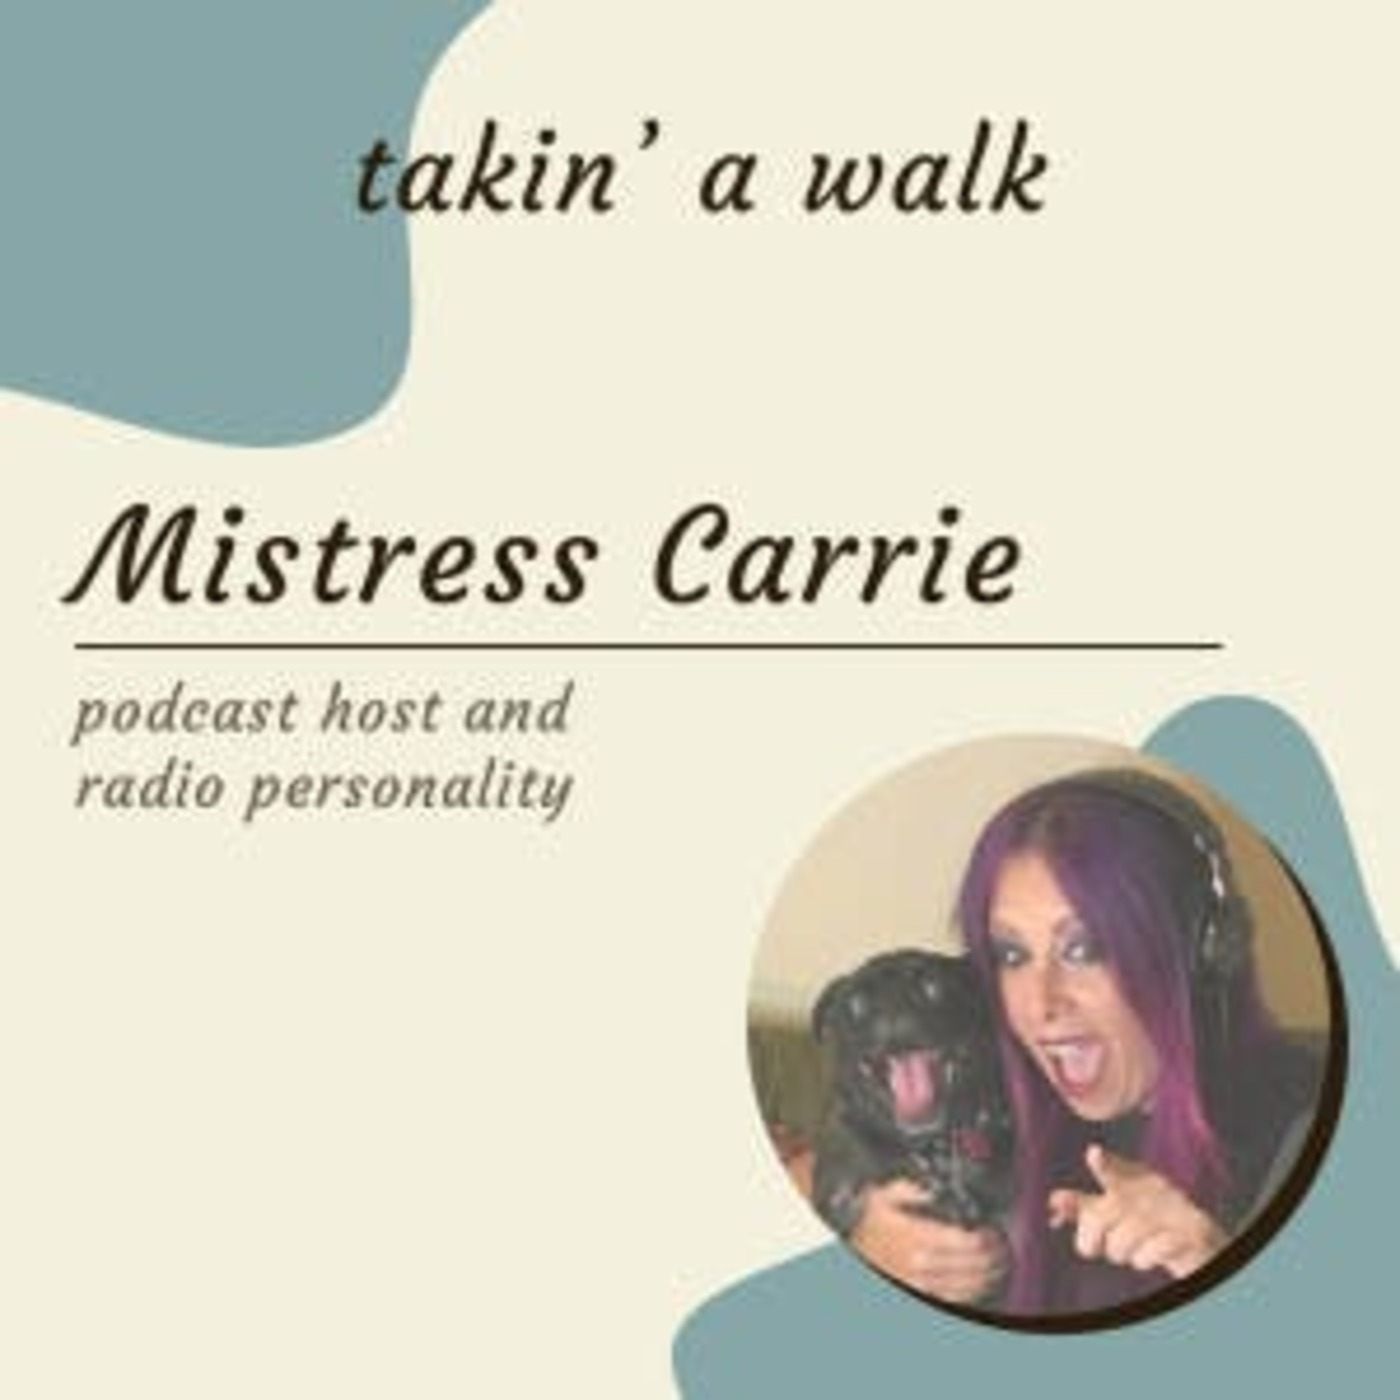 DJ and podcaster Mistress Carrie: A passion for music and storytelling on the Takin A Walk podcast Tuesday.